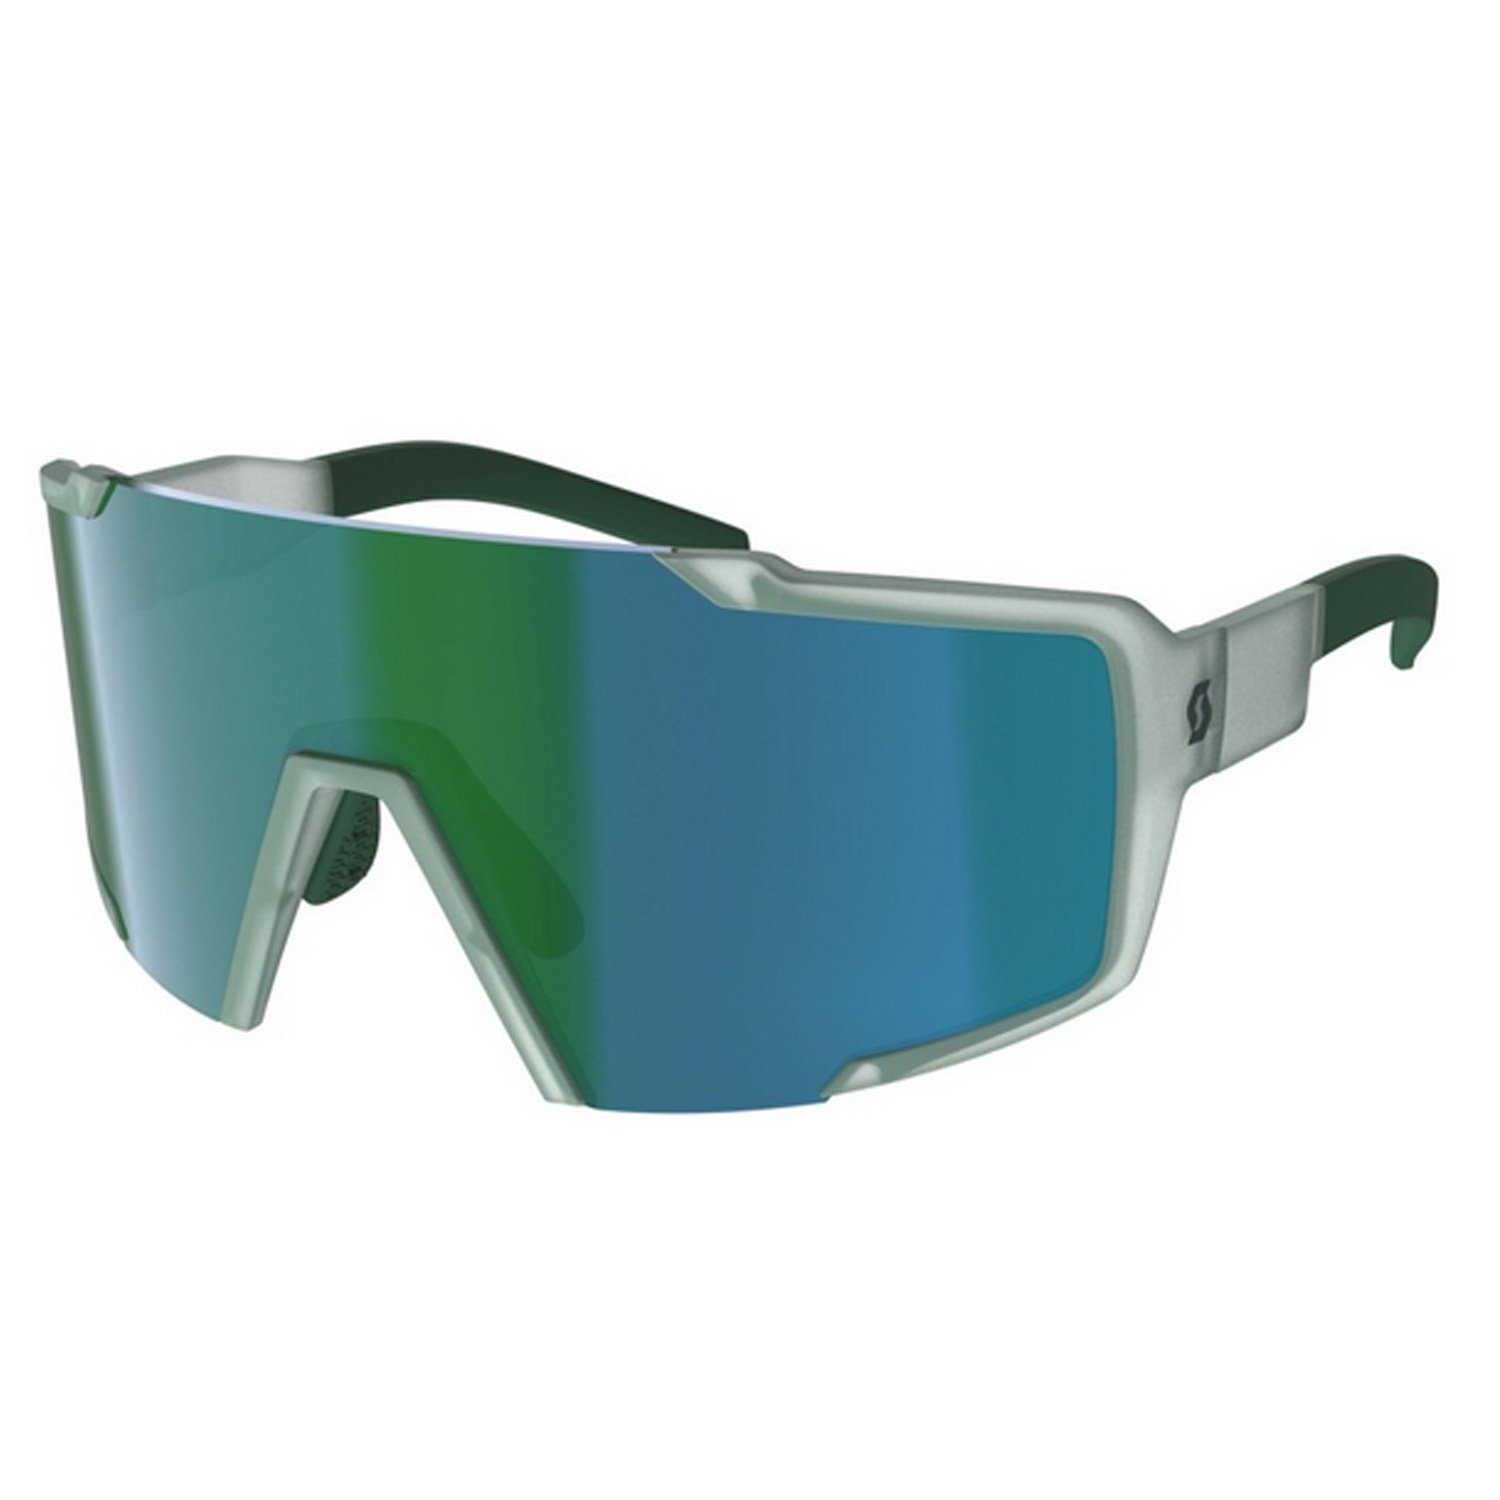 Очки велосипедные SCOTT Shield Compact mineral blue green chrome, ES289235-7240121 400nm 480nm blue laser protective goggles for 405nm 450nm 480nm diode eye protection